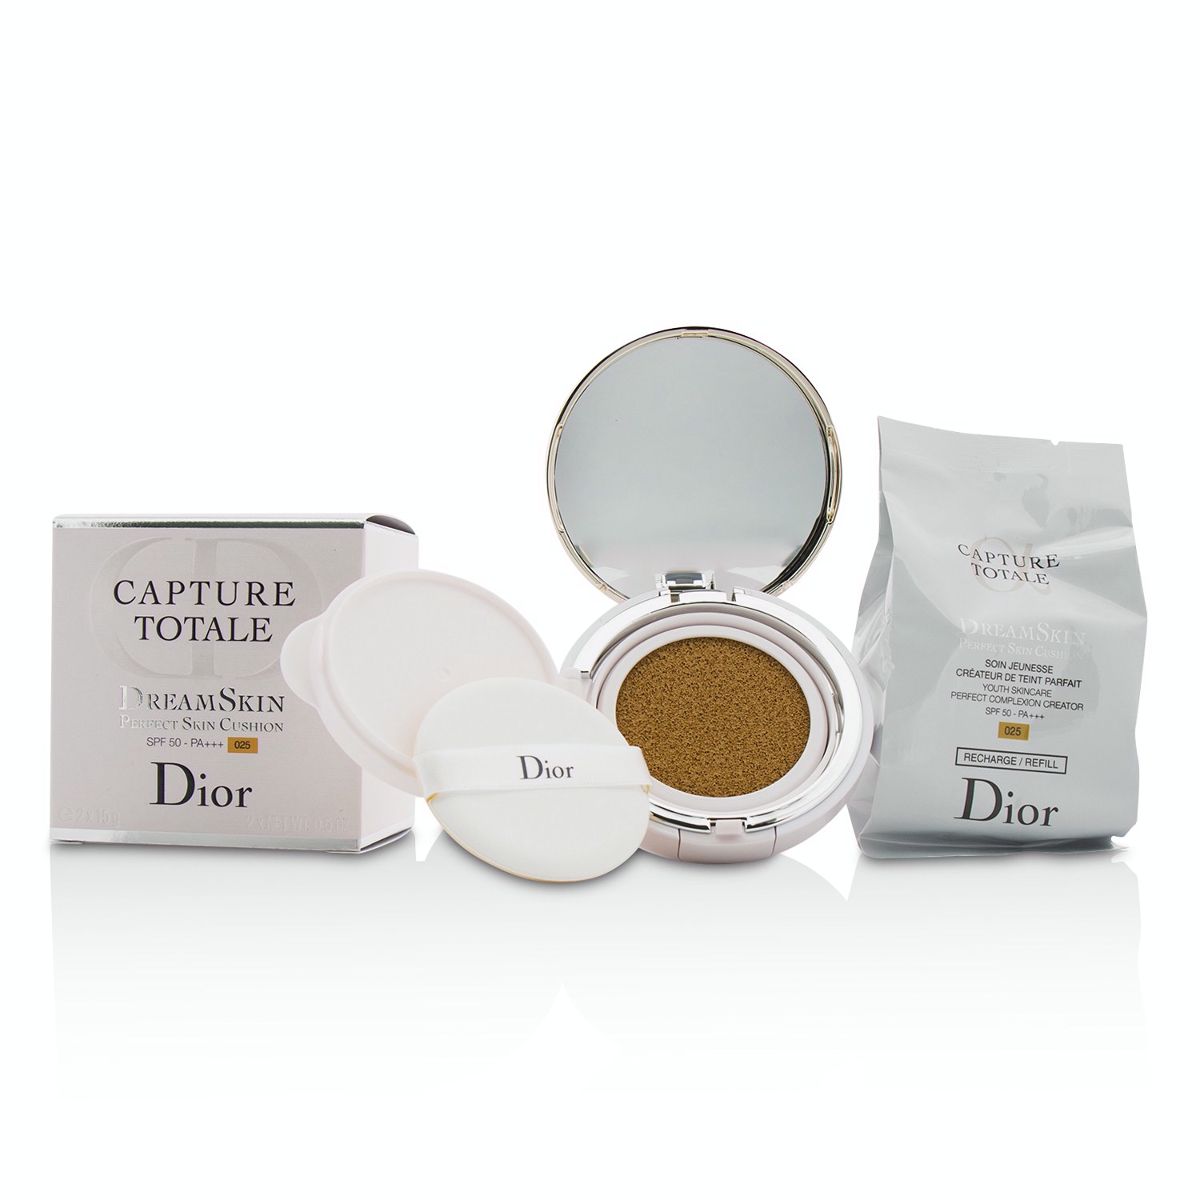 Capture Totale Dreamskin Perfect Skin Cushion SPF 50 With Extra Refill - # 025 Christian Dior Image